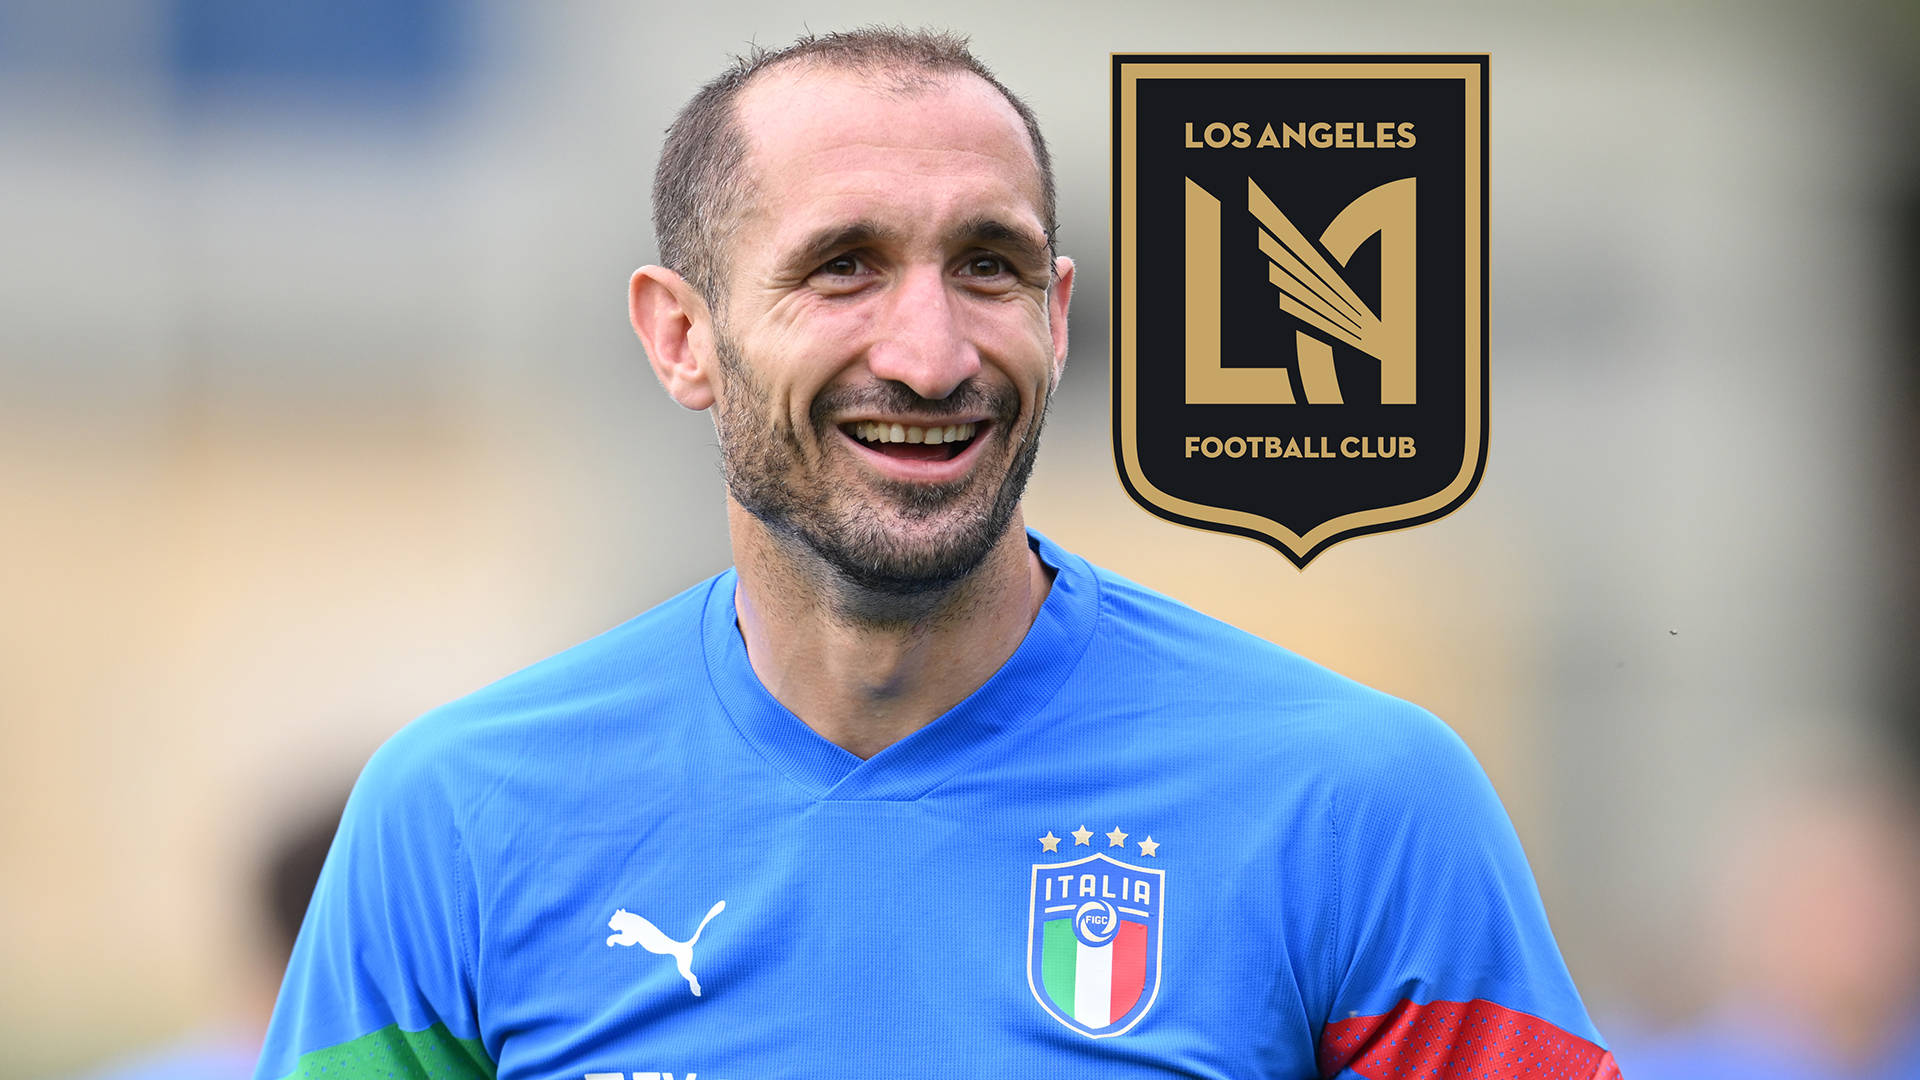 Giorgiochiellinis Glada Ansikte Los Angeles Fc-logotyp (note: This Is Assuming You Are Asking For A Sentence Where Giorgio Chiellini's Face Is Added To The Wallpaper Alongside The Los Angeles Fc Logo. If You Could Provide More Context, We Could Give A Better Translation.) Wallpaper